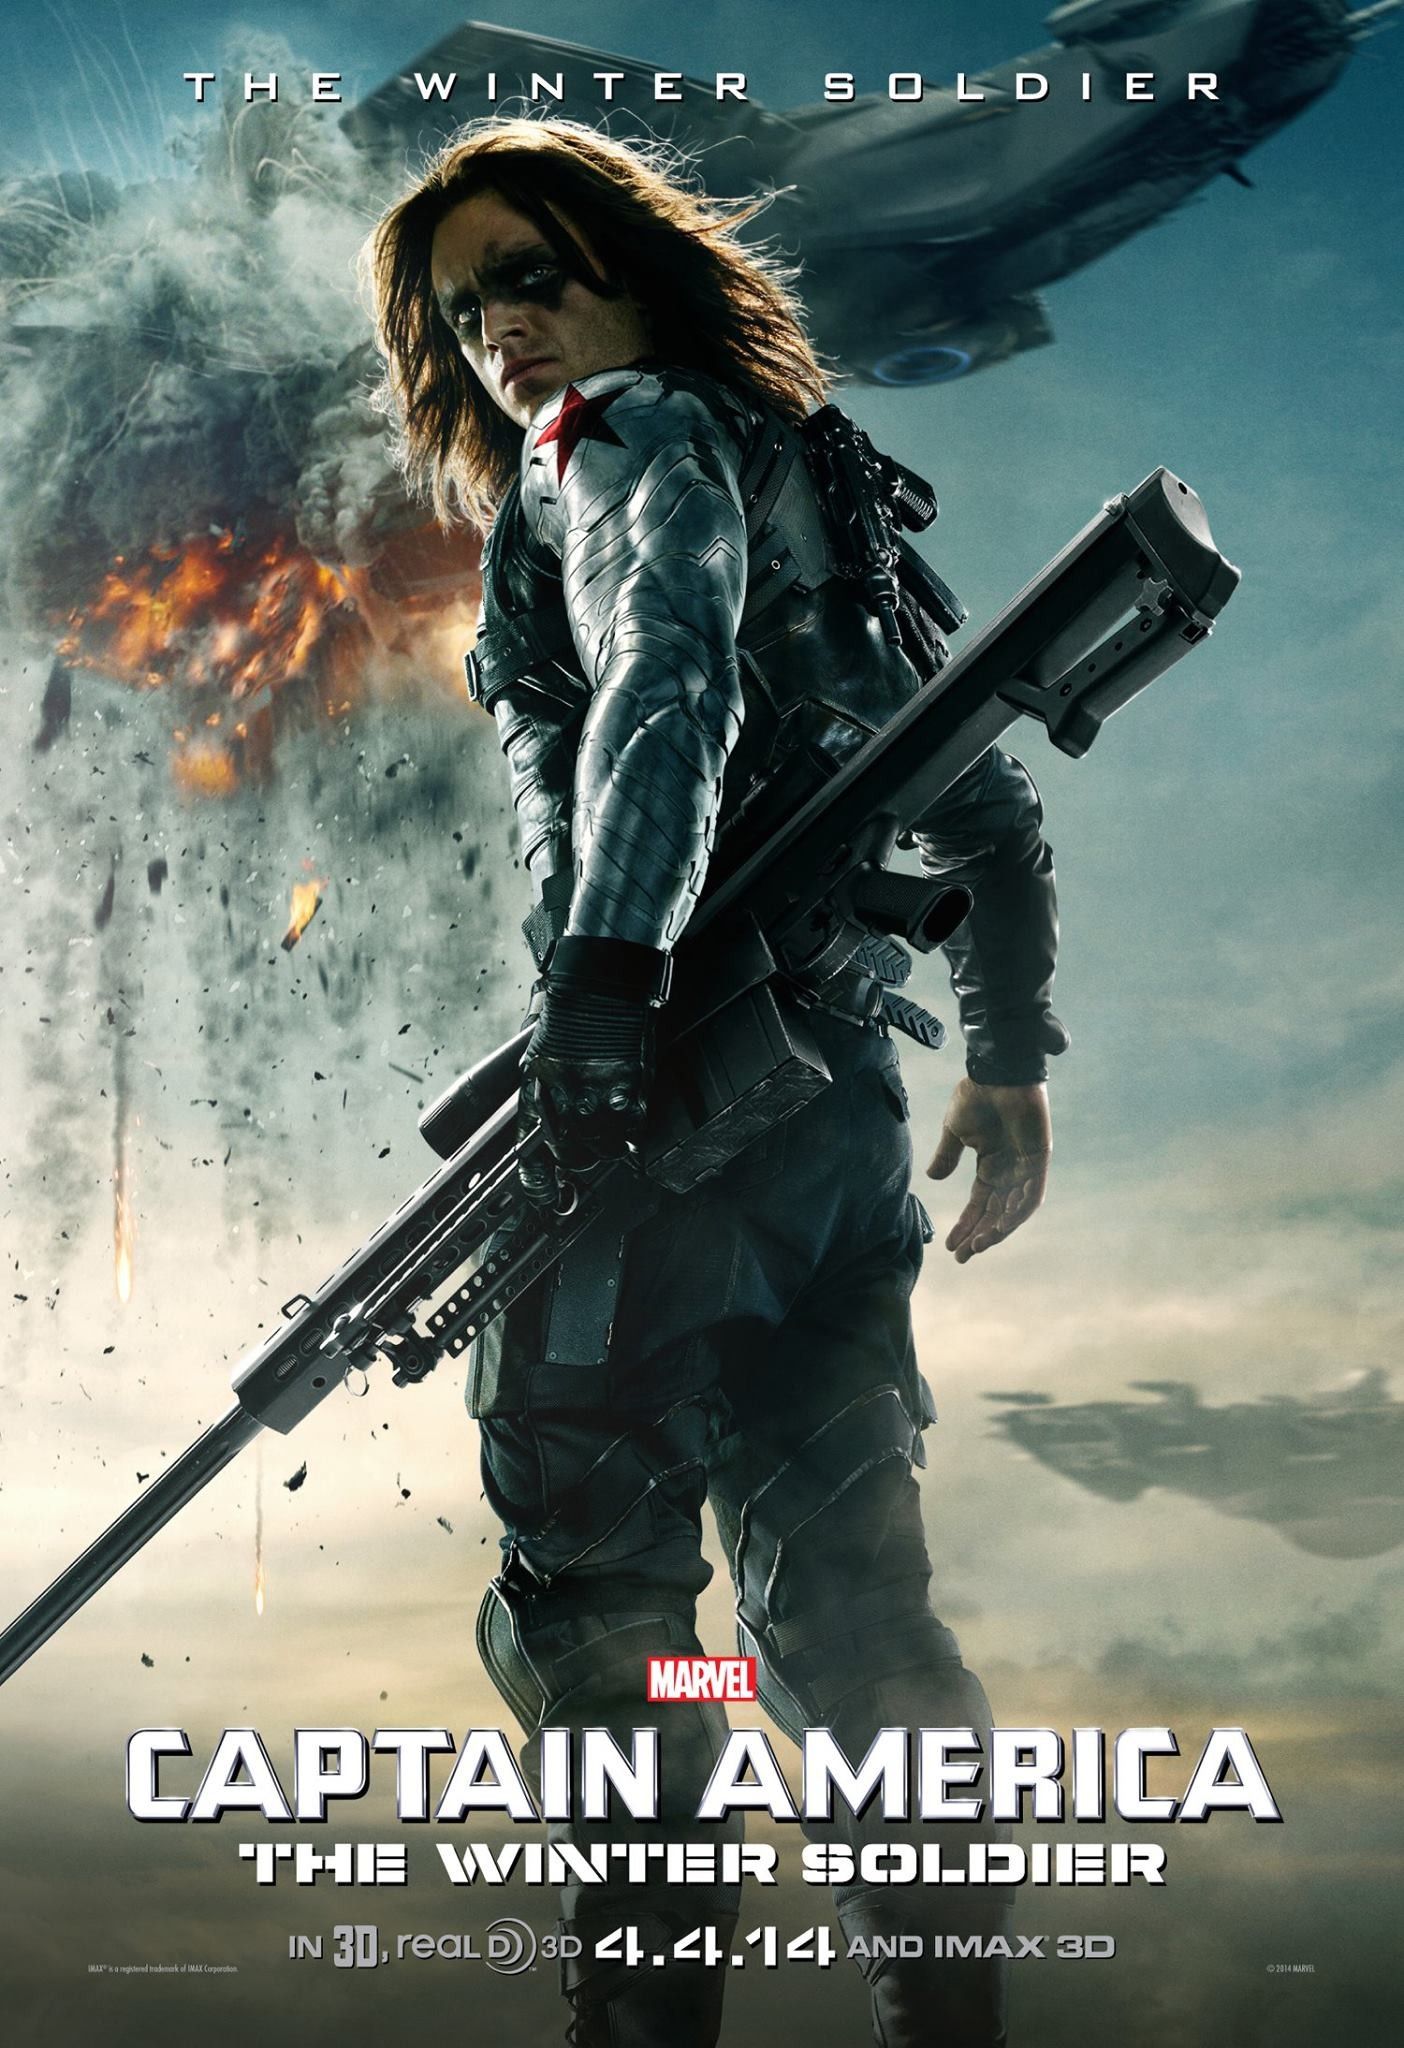 Captain America 2 The Winter Soldier Character Poster